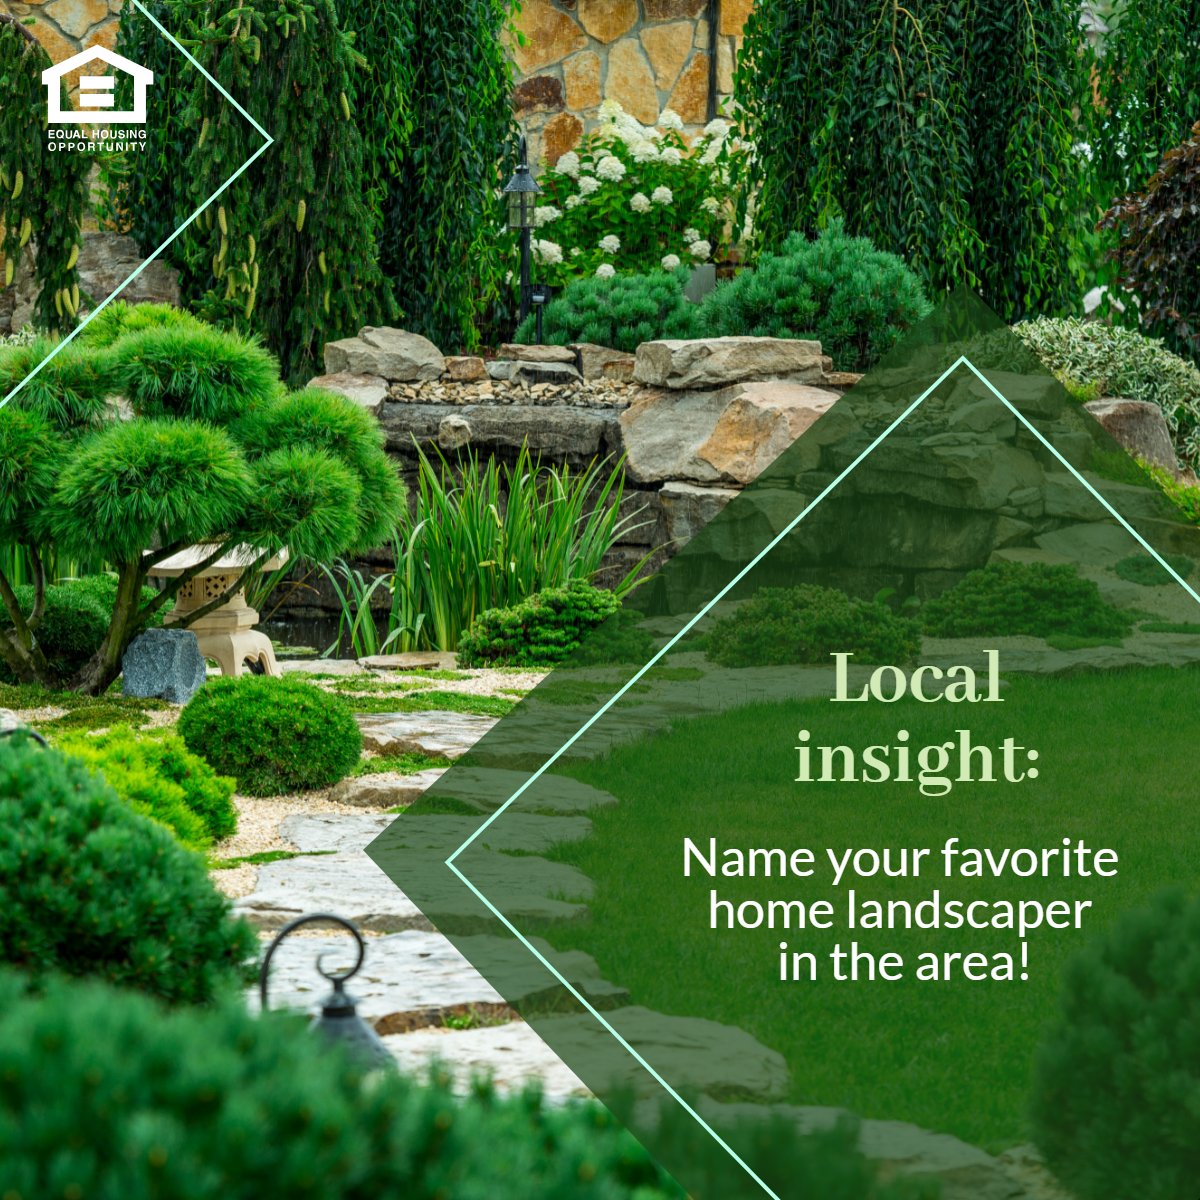 Good landscaping has several important functions and provides numerous benefits. 

Do you have any recommendations? 

Share them below!

#HomeGoals #HomeImprovement